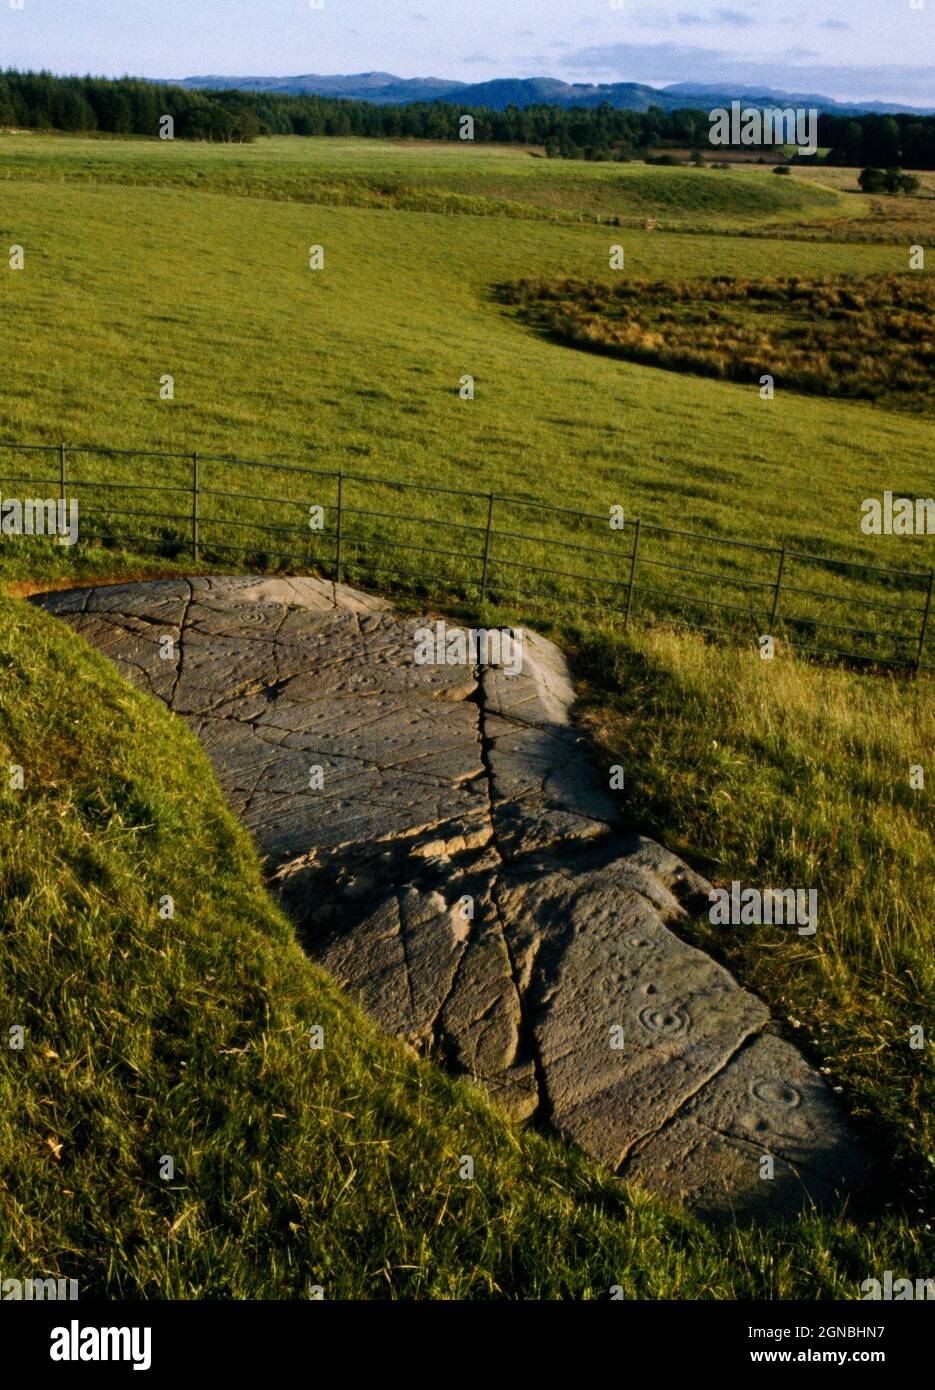 View SSE of Baluachraig prehistoric rock art, Kilmartin, Argyll, Scotland, UK, featuring lines & clusters of pecked cupmarks, cup-and-rings & grooves. Stock Photo